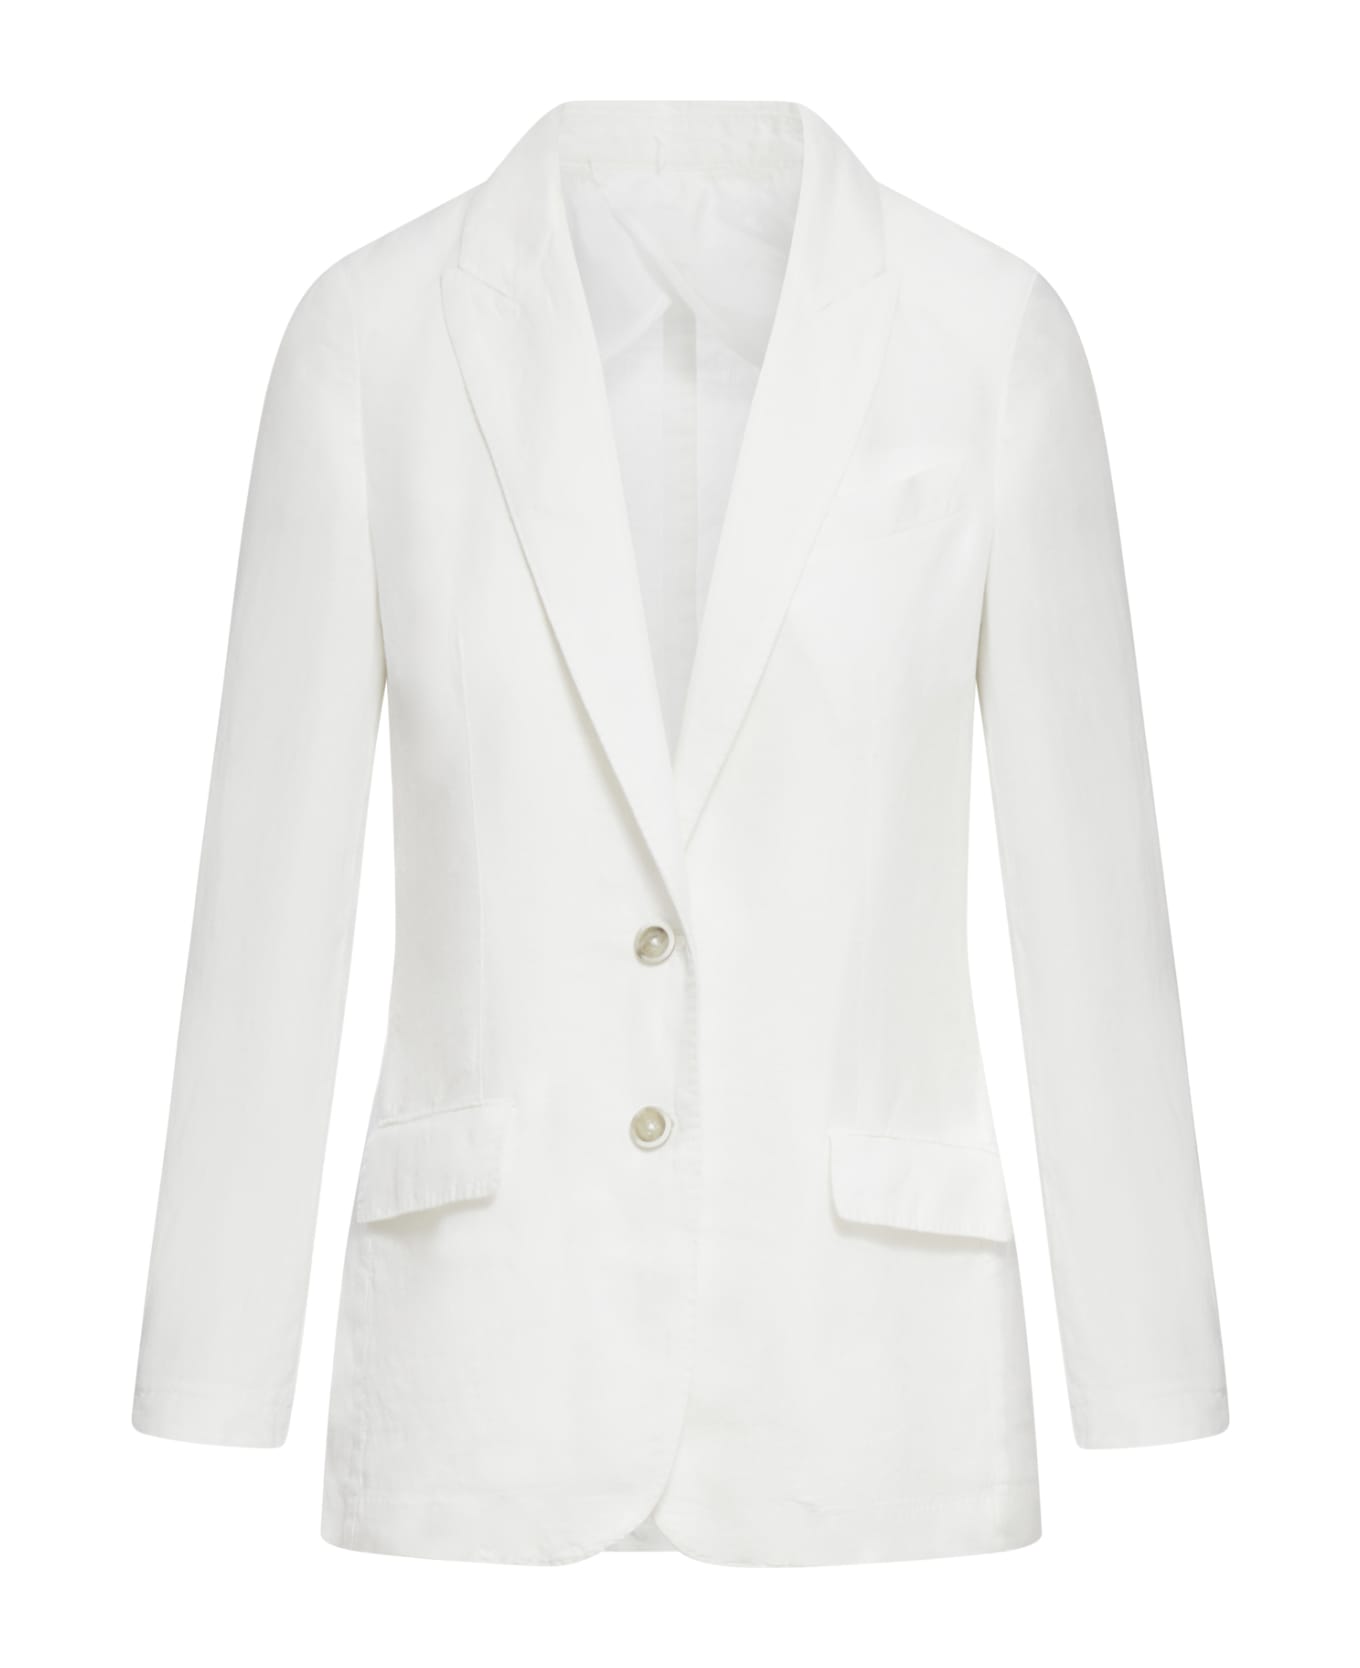 120% Lino Women Jacket With Mf Seams With 2 Buttons - White ブレザー